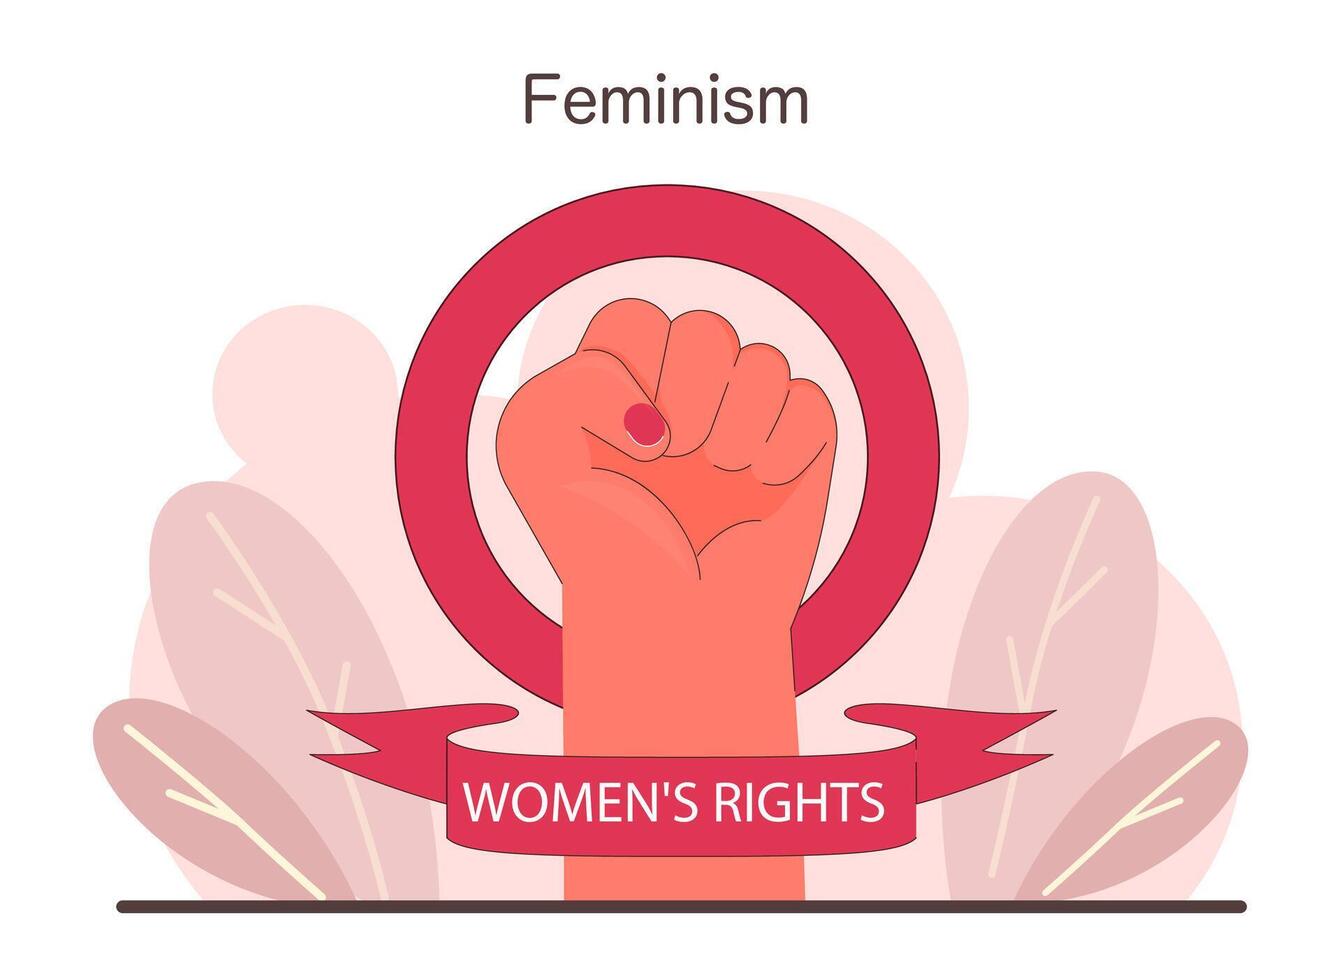 A raised fist enclosed in a circle, symbolizing women's empowerment vector